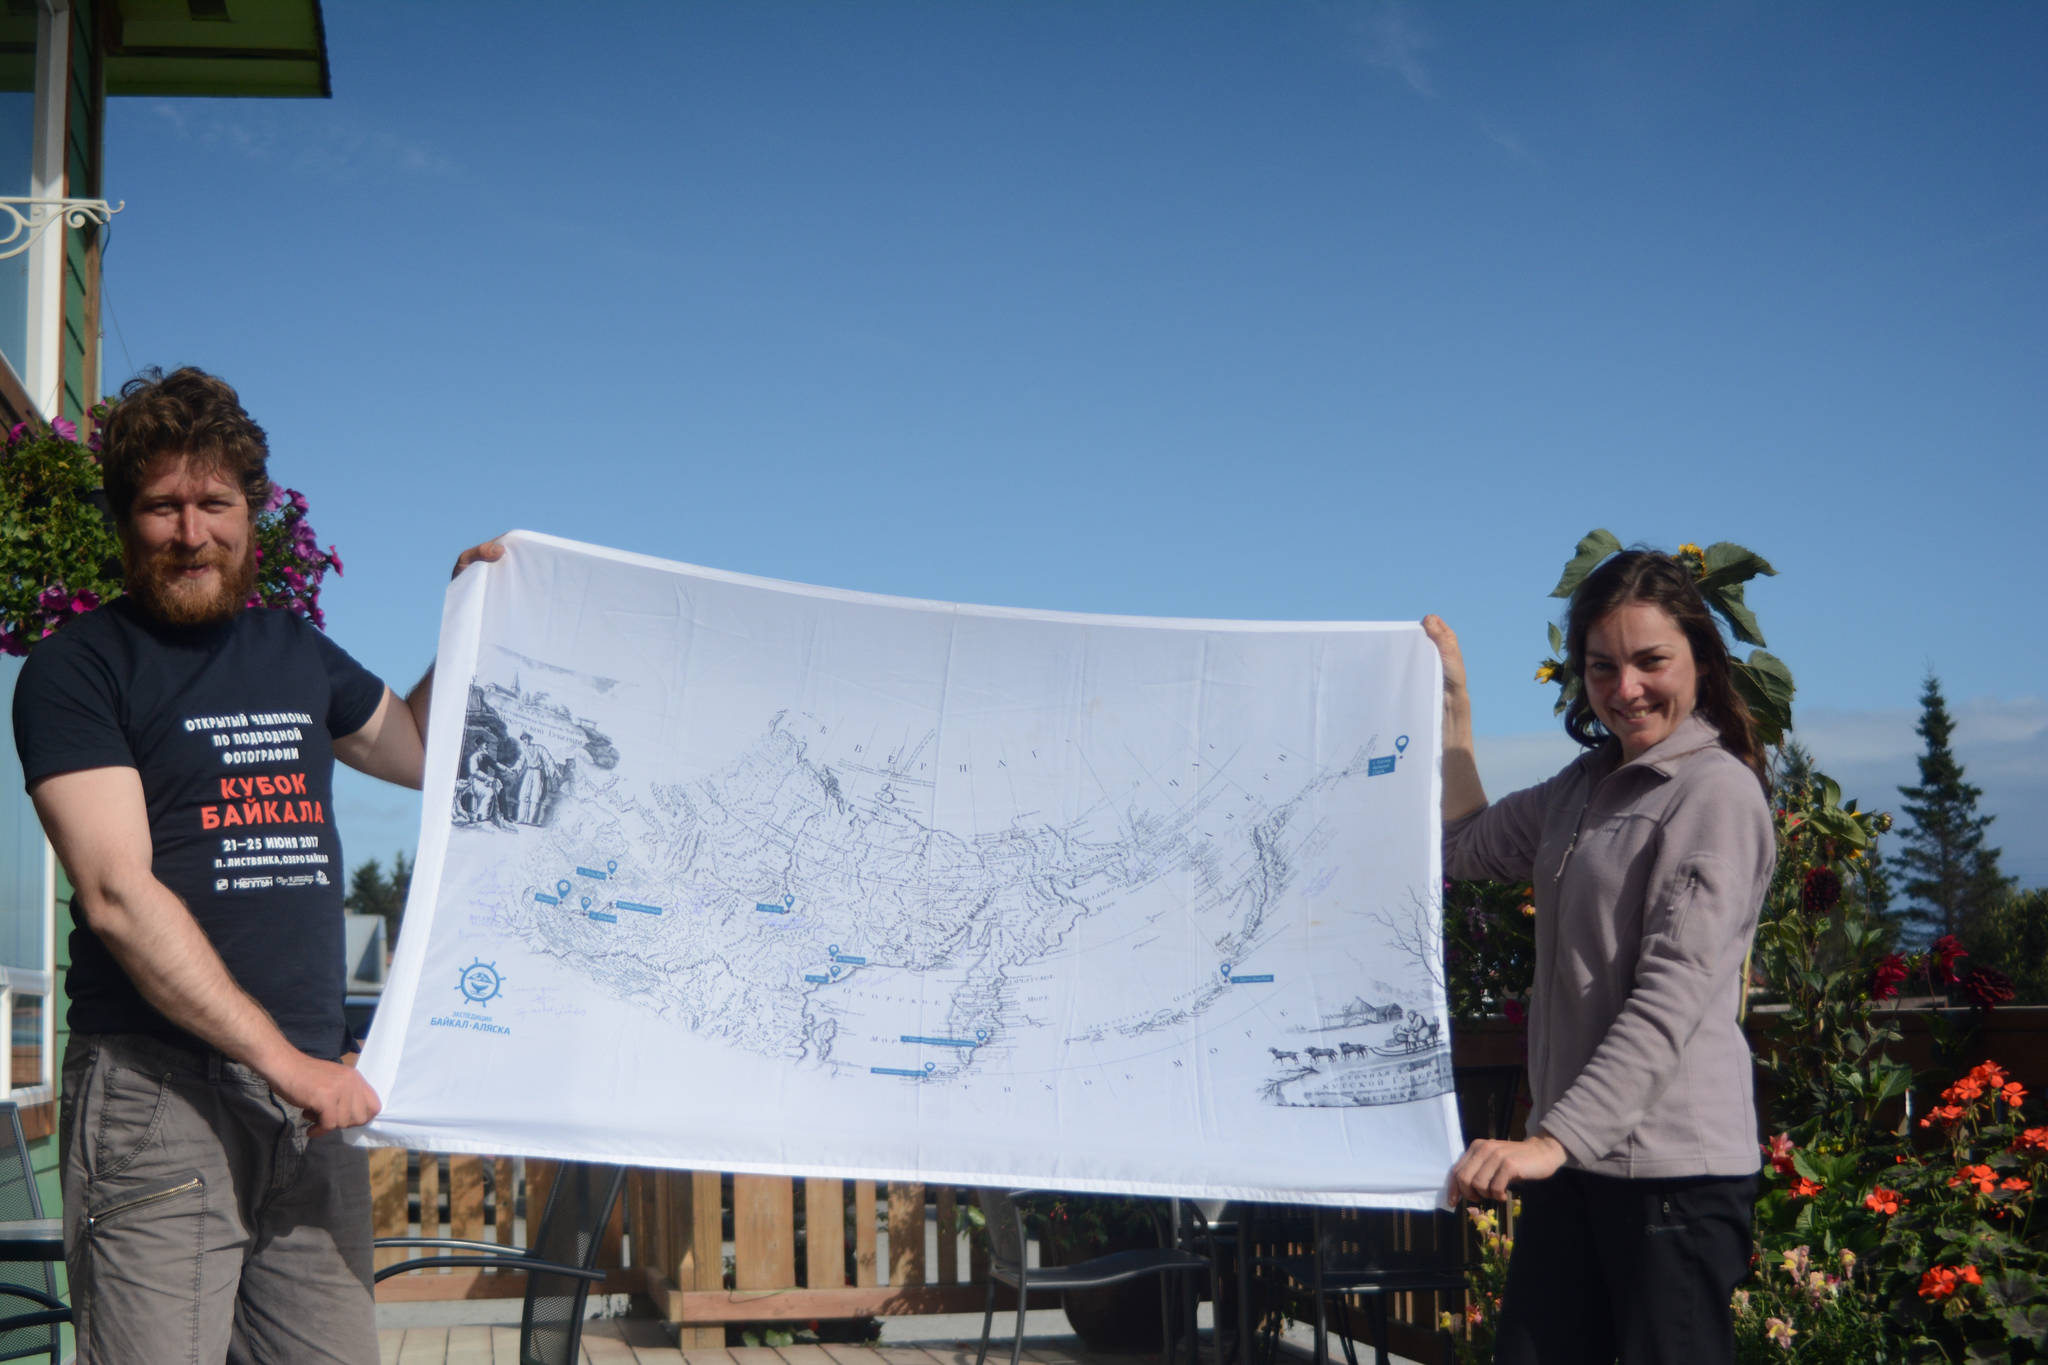 Anatoly Kazakevich, left, and Anna Vazhenina , right, hold up a flag showing the route of the voyage of their inflatable catamaran, Iskatel, last Thursday, Aug. 30, 2018, at K-Bay Caffe in Homer, Alaska. They finished sailing from Lake Baikal, Russia, to Homer, on Aug. 26. The flag is from an illustration from the 1803-06 voyage of Capt. Ivan Kruzenshtern. (Photo by Michael Armstrong/Homer News)